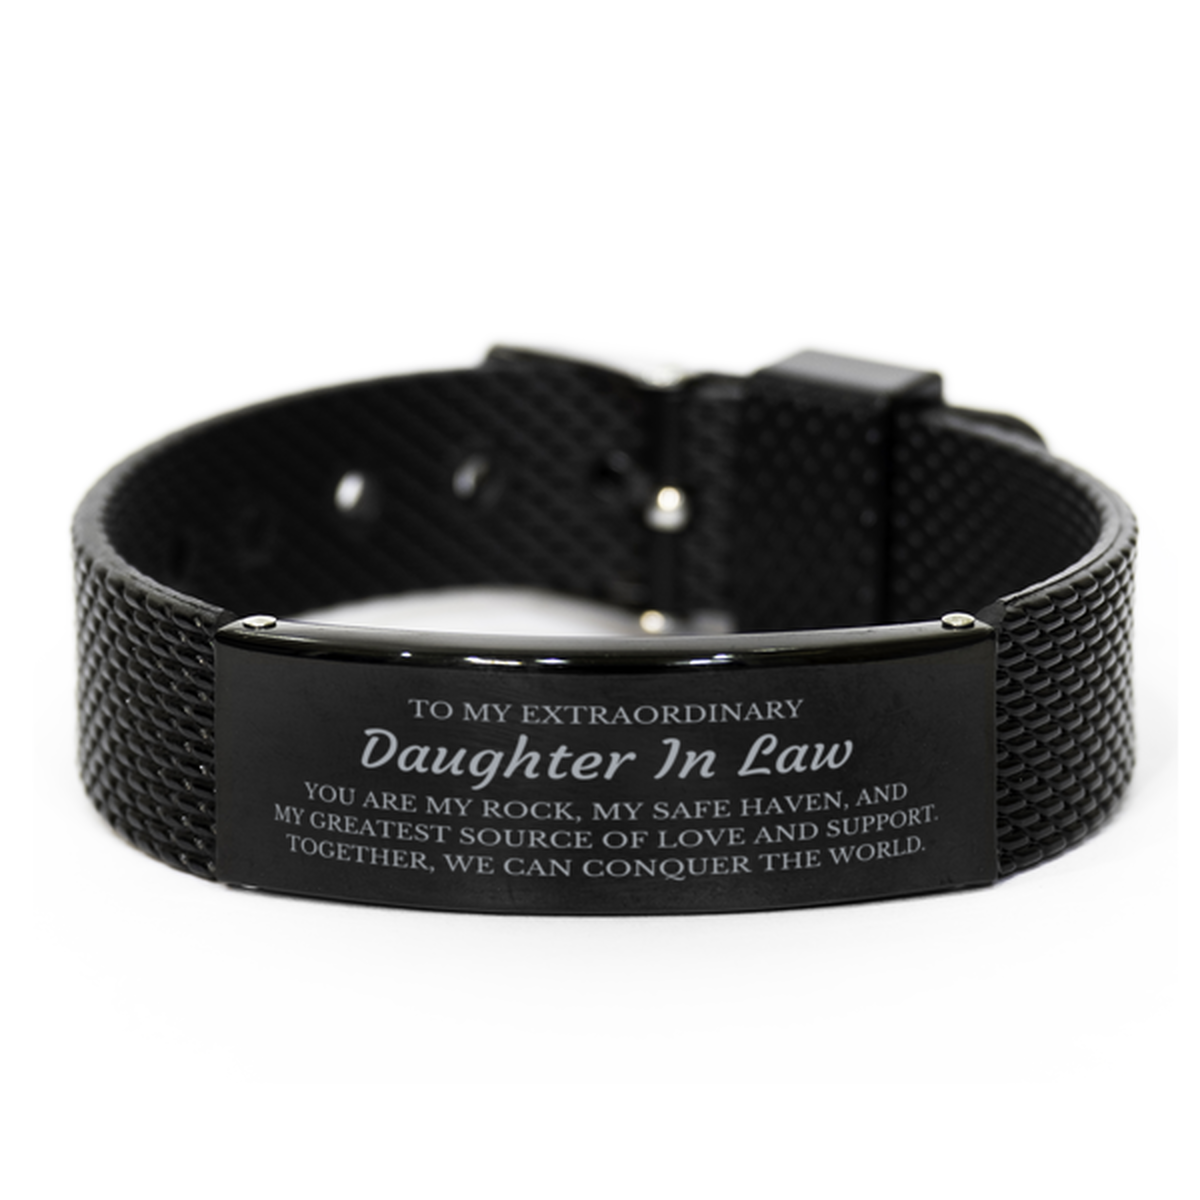 To My Extraordinary Daughter In Law Gifts, Together, we can conquer the world, Birthday Black Shark Mesh Bracelet For Daughter In Law, Christmas Gifts For Daughter In Law